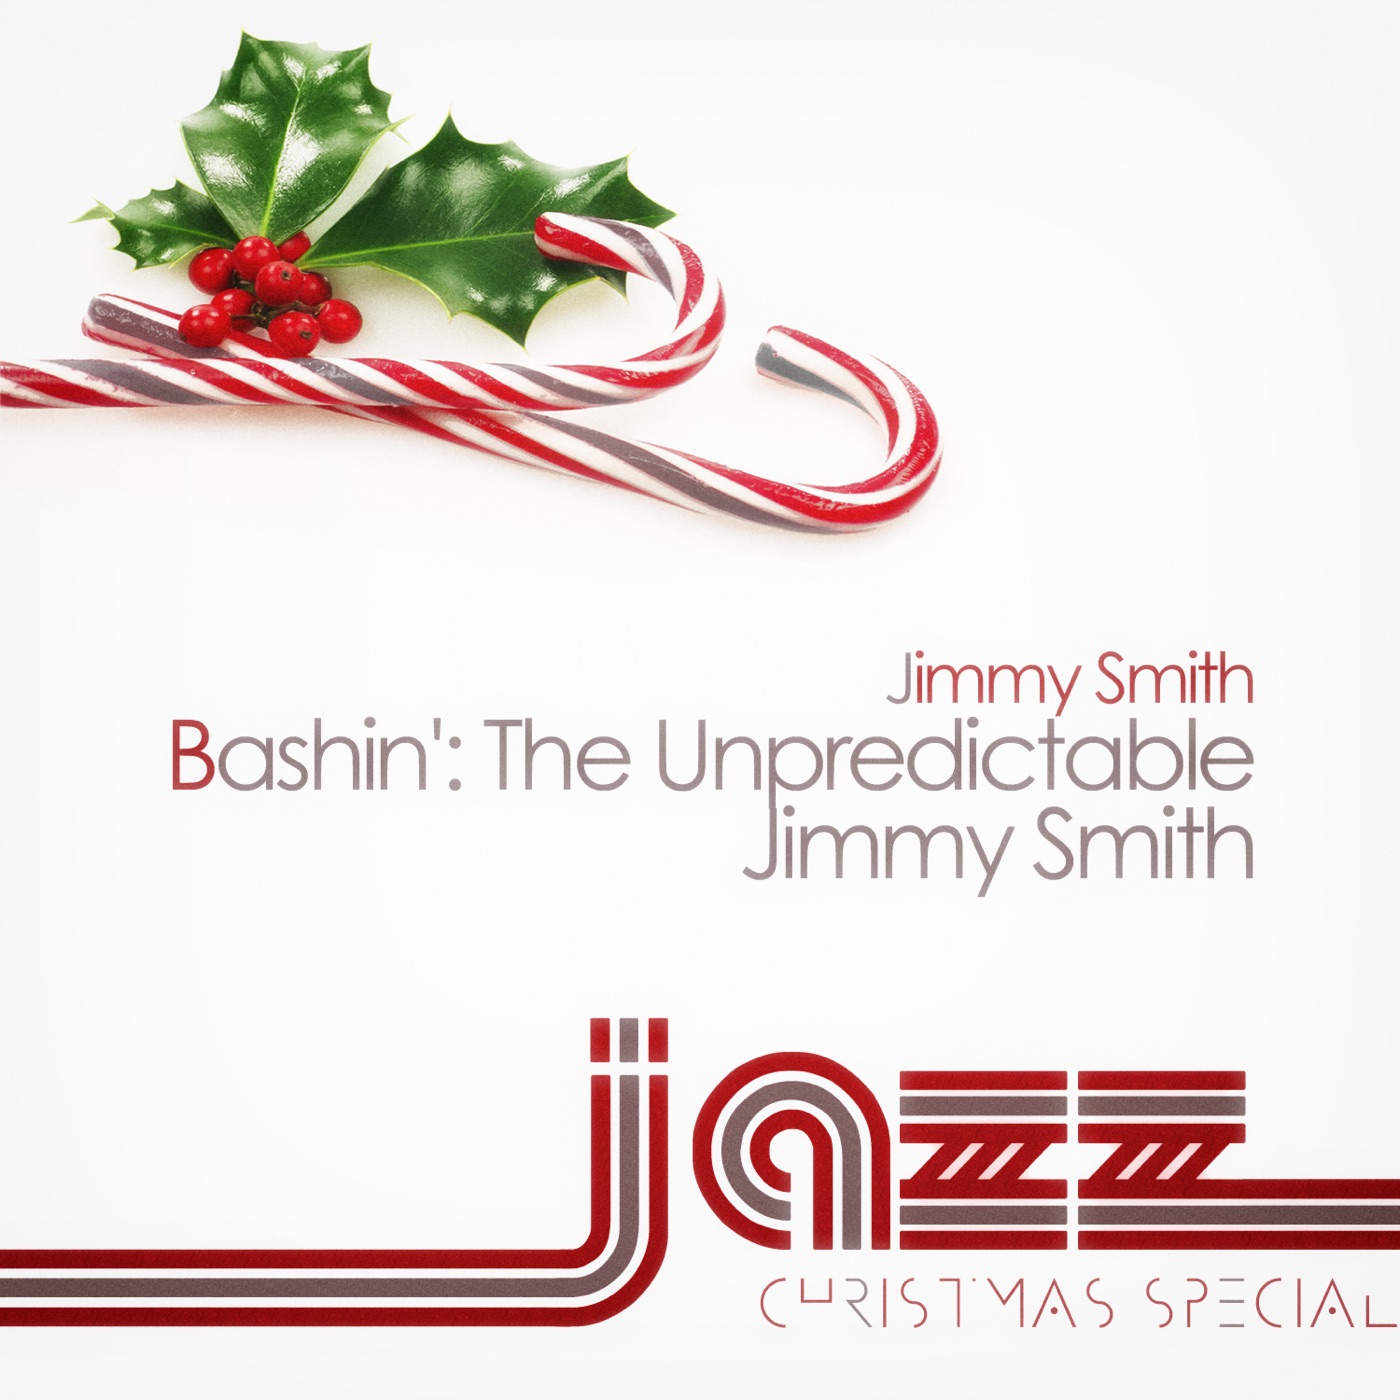 Bashin' - The Unpredictable Jimmy Smith by Jimmy Smith